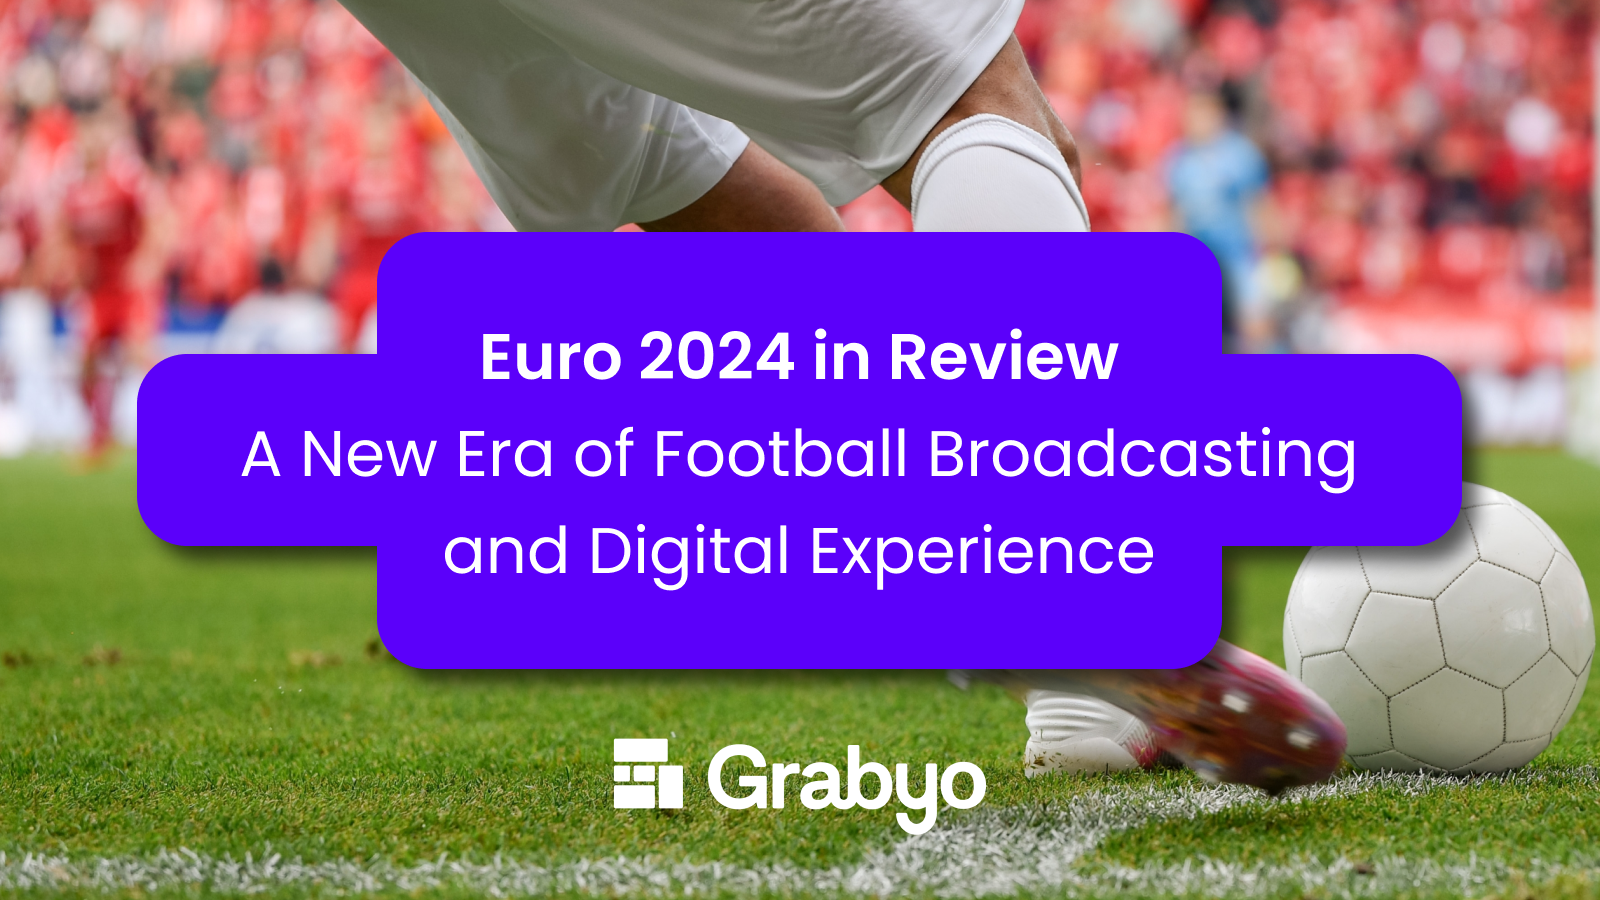 Euro 2024 in review: A new era of football broadcasting and digital experience